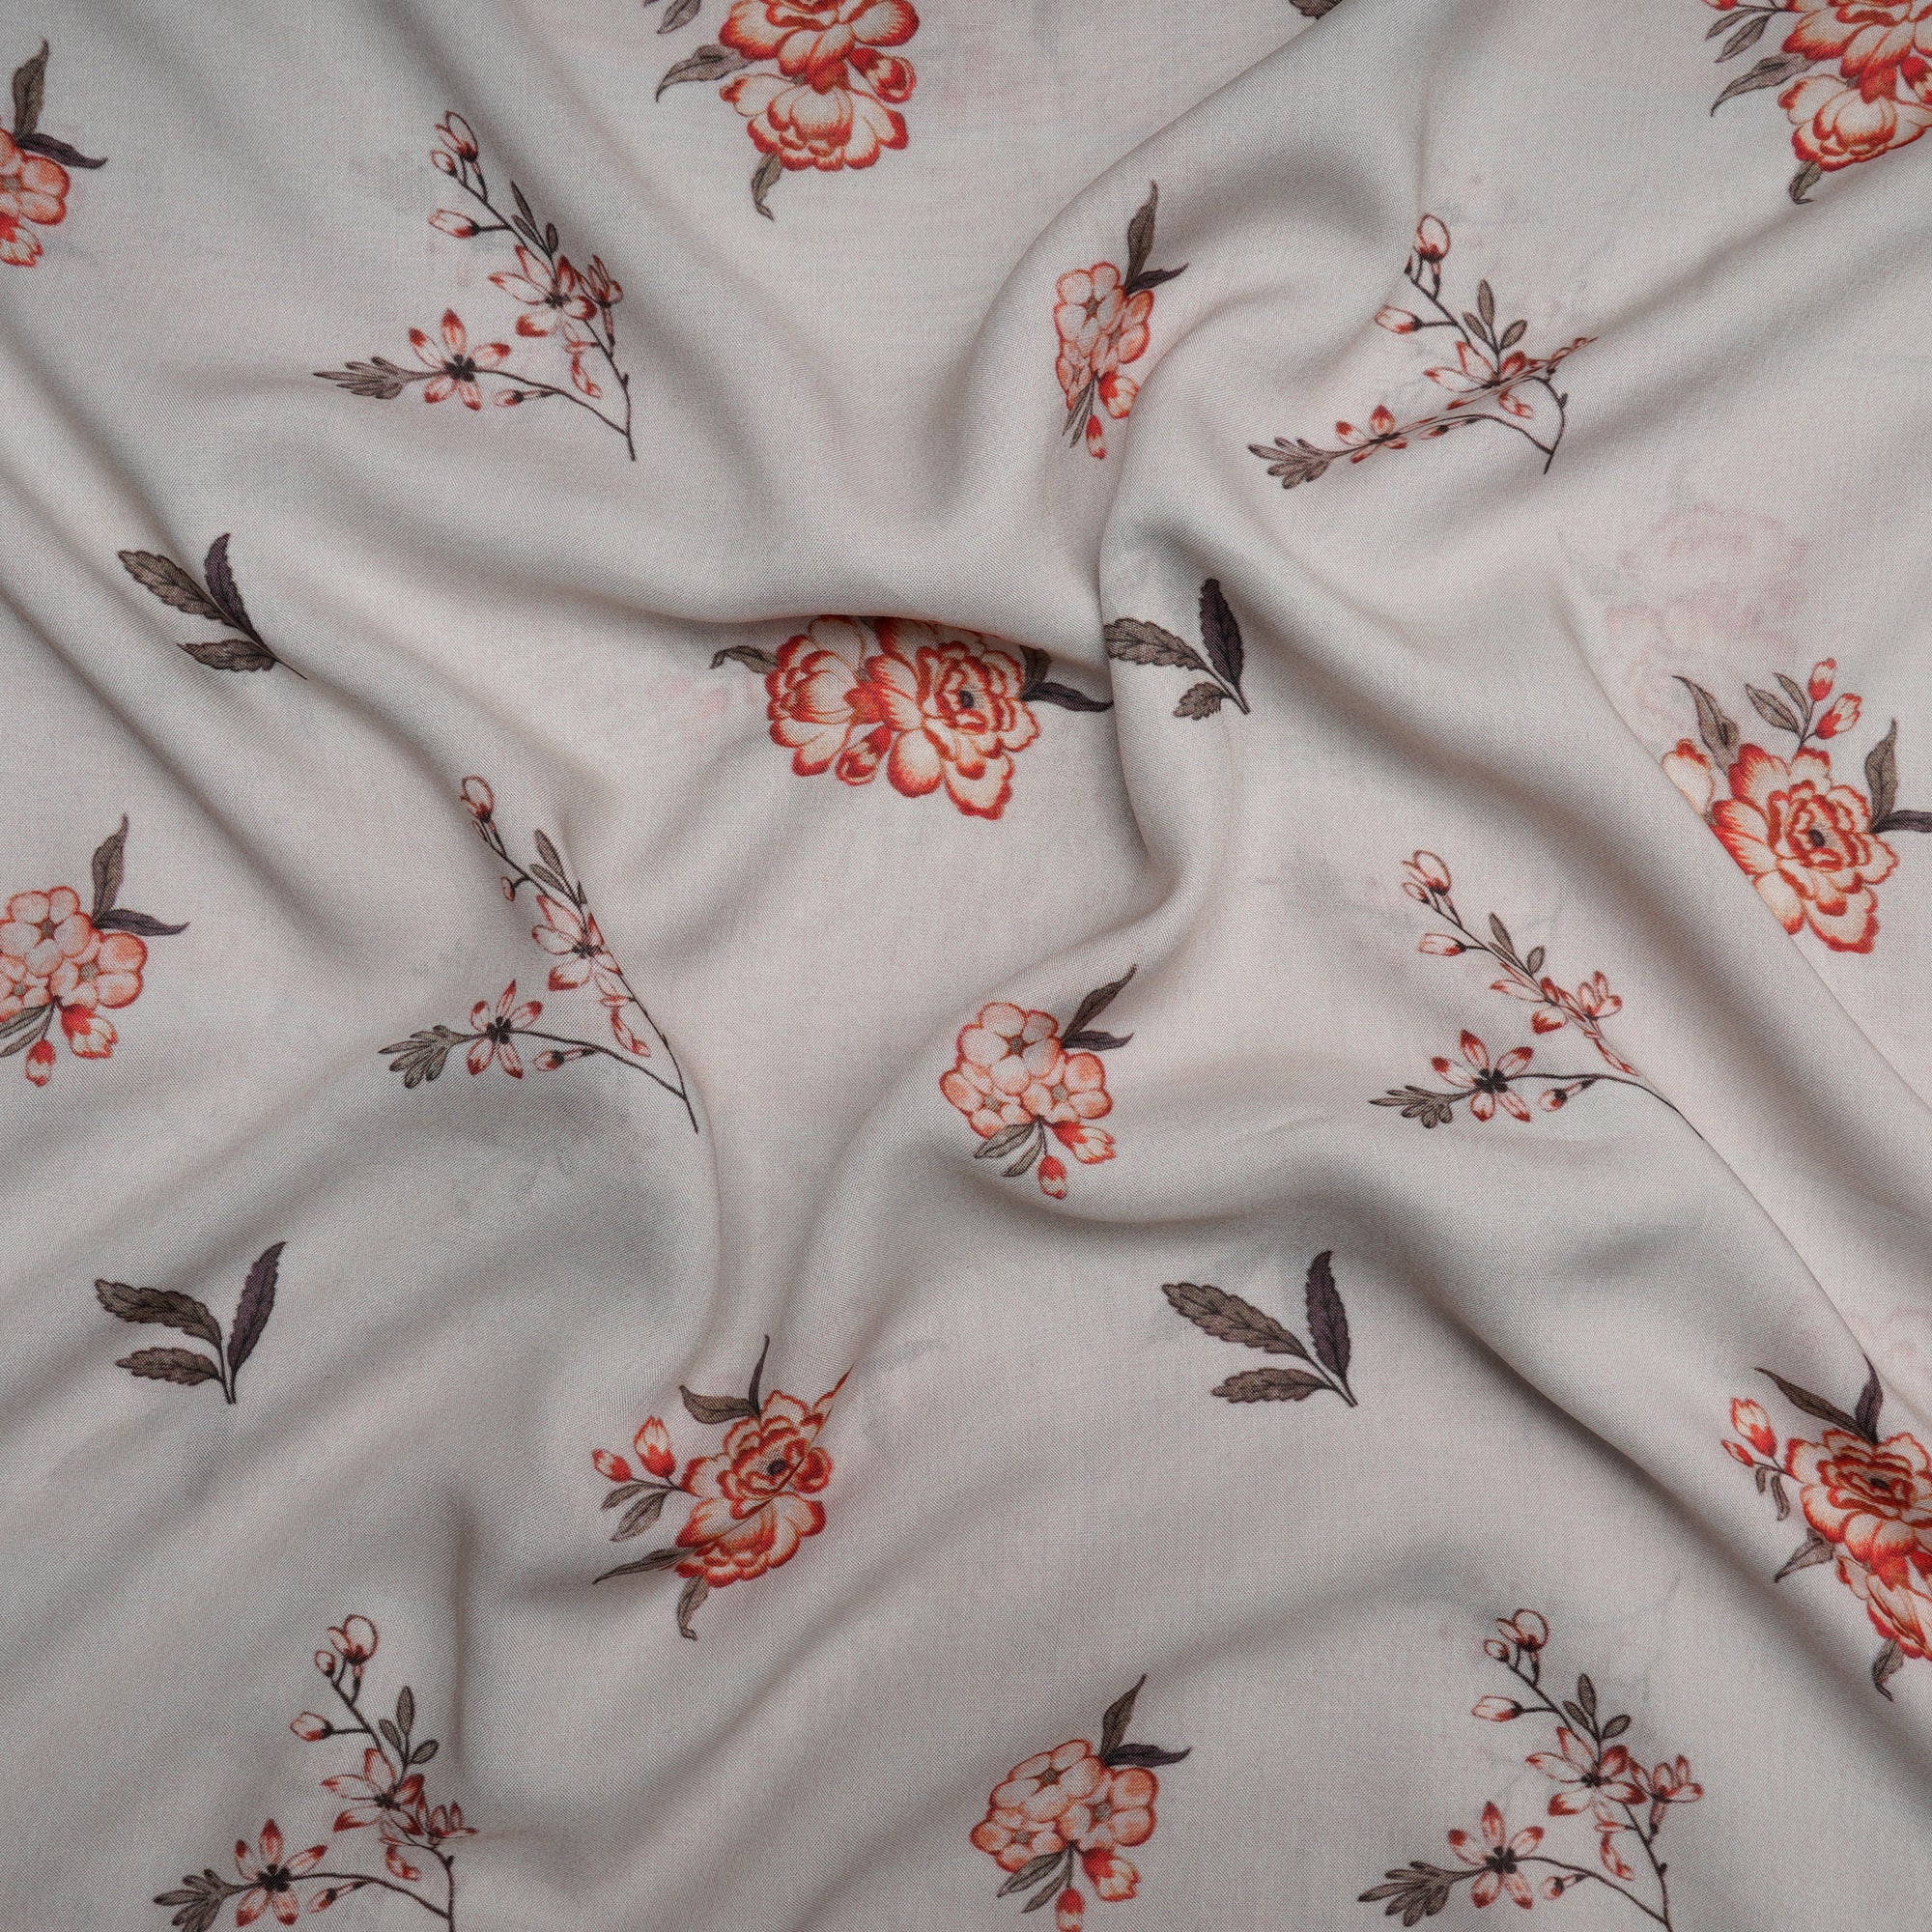 Off-White Floral Pattern Digital Printed Modal Fabric